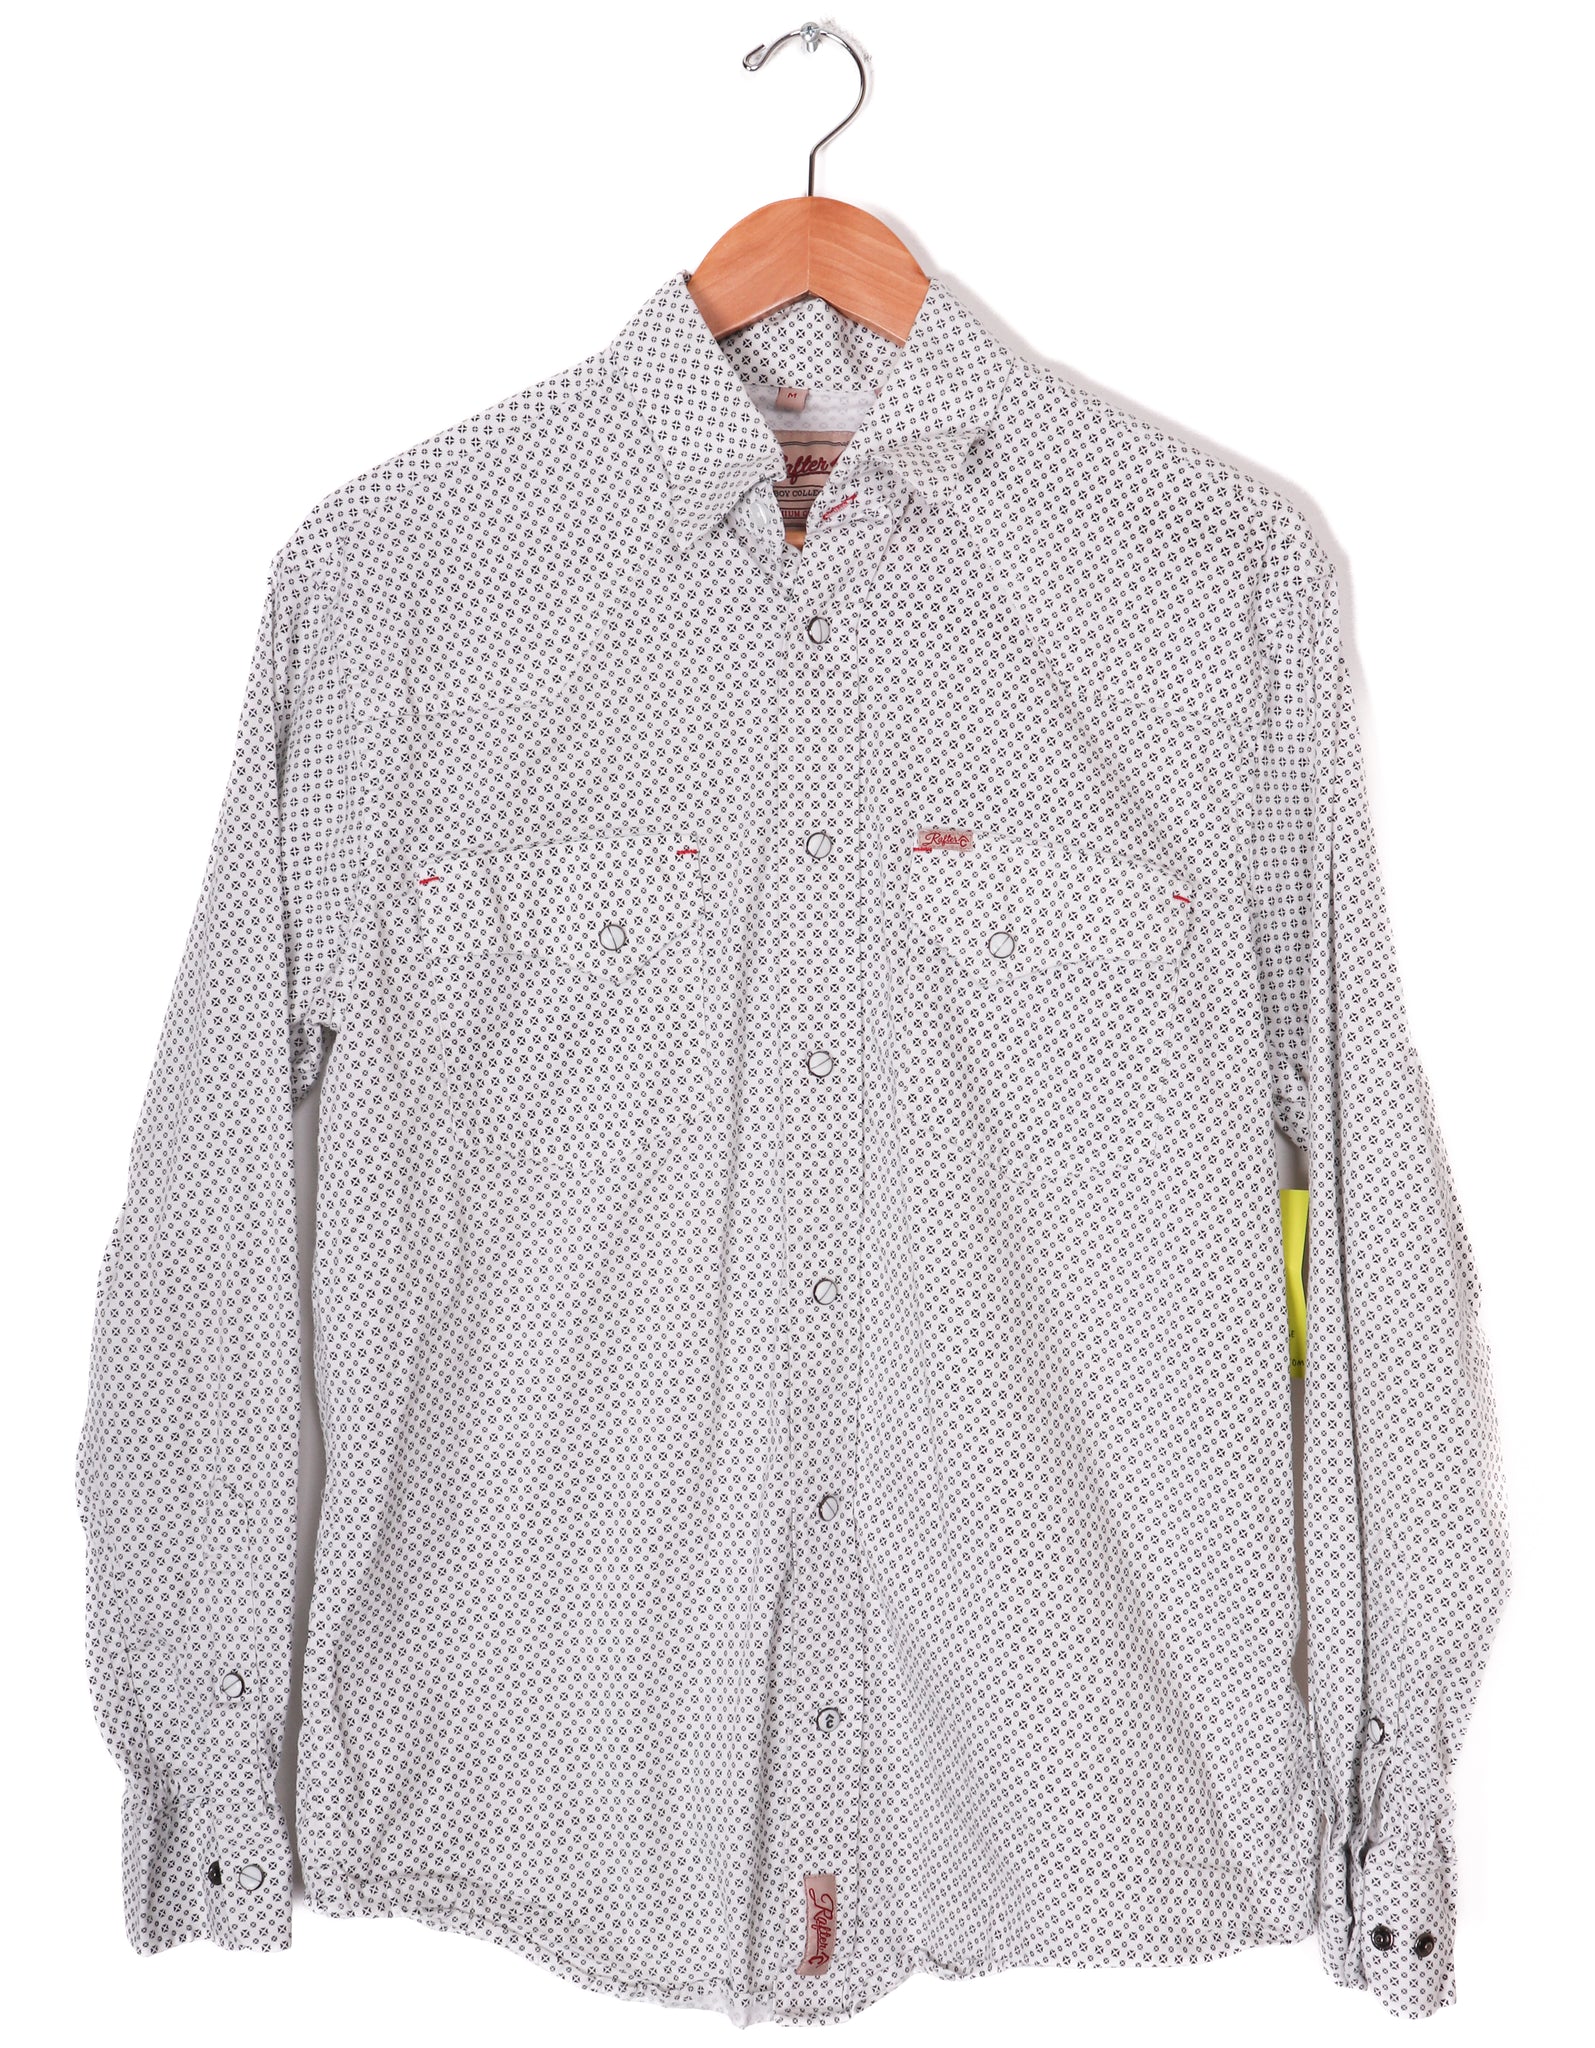 Rafter C Cowboy Collection Western Style Button Up